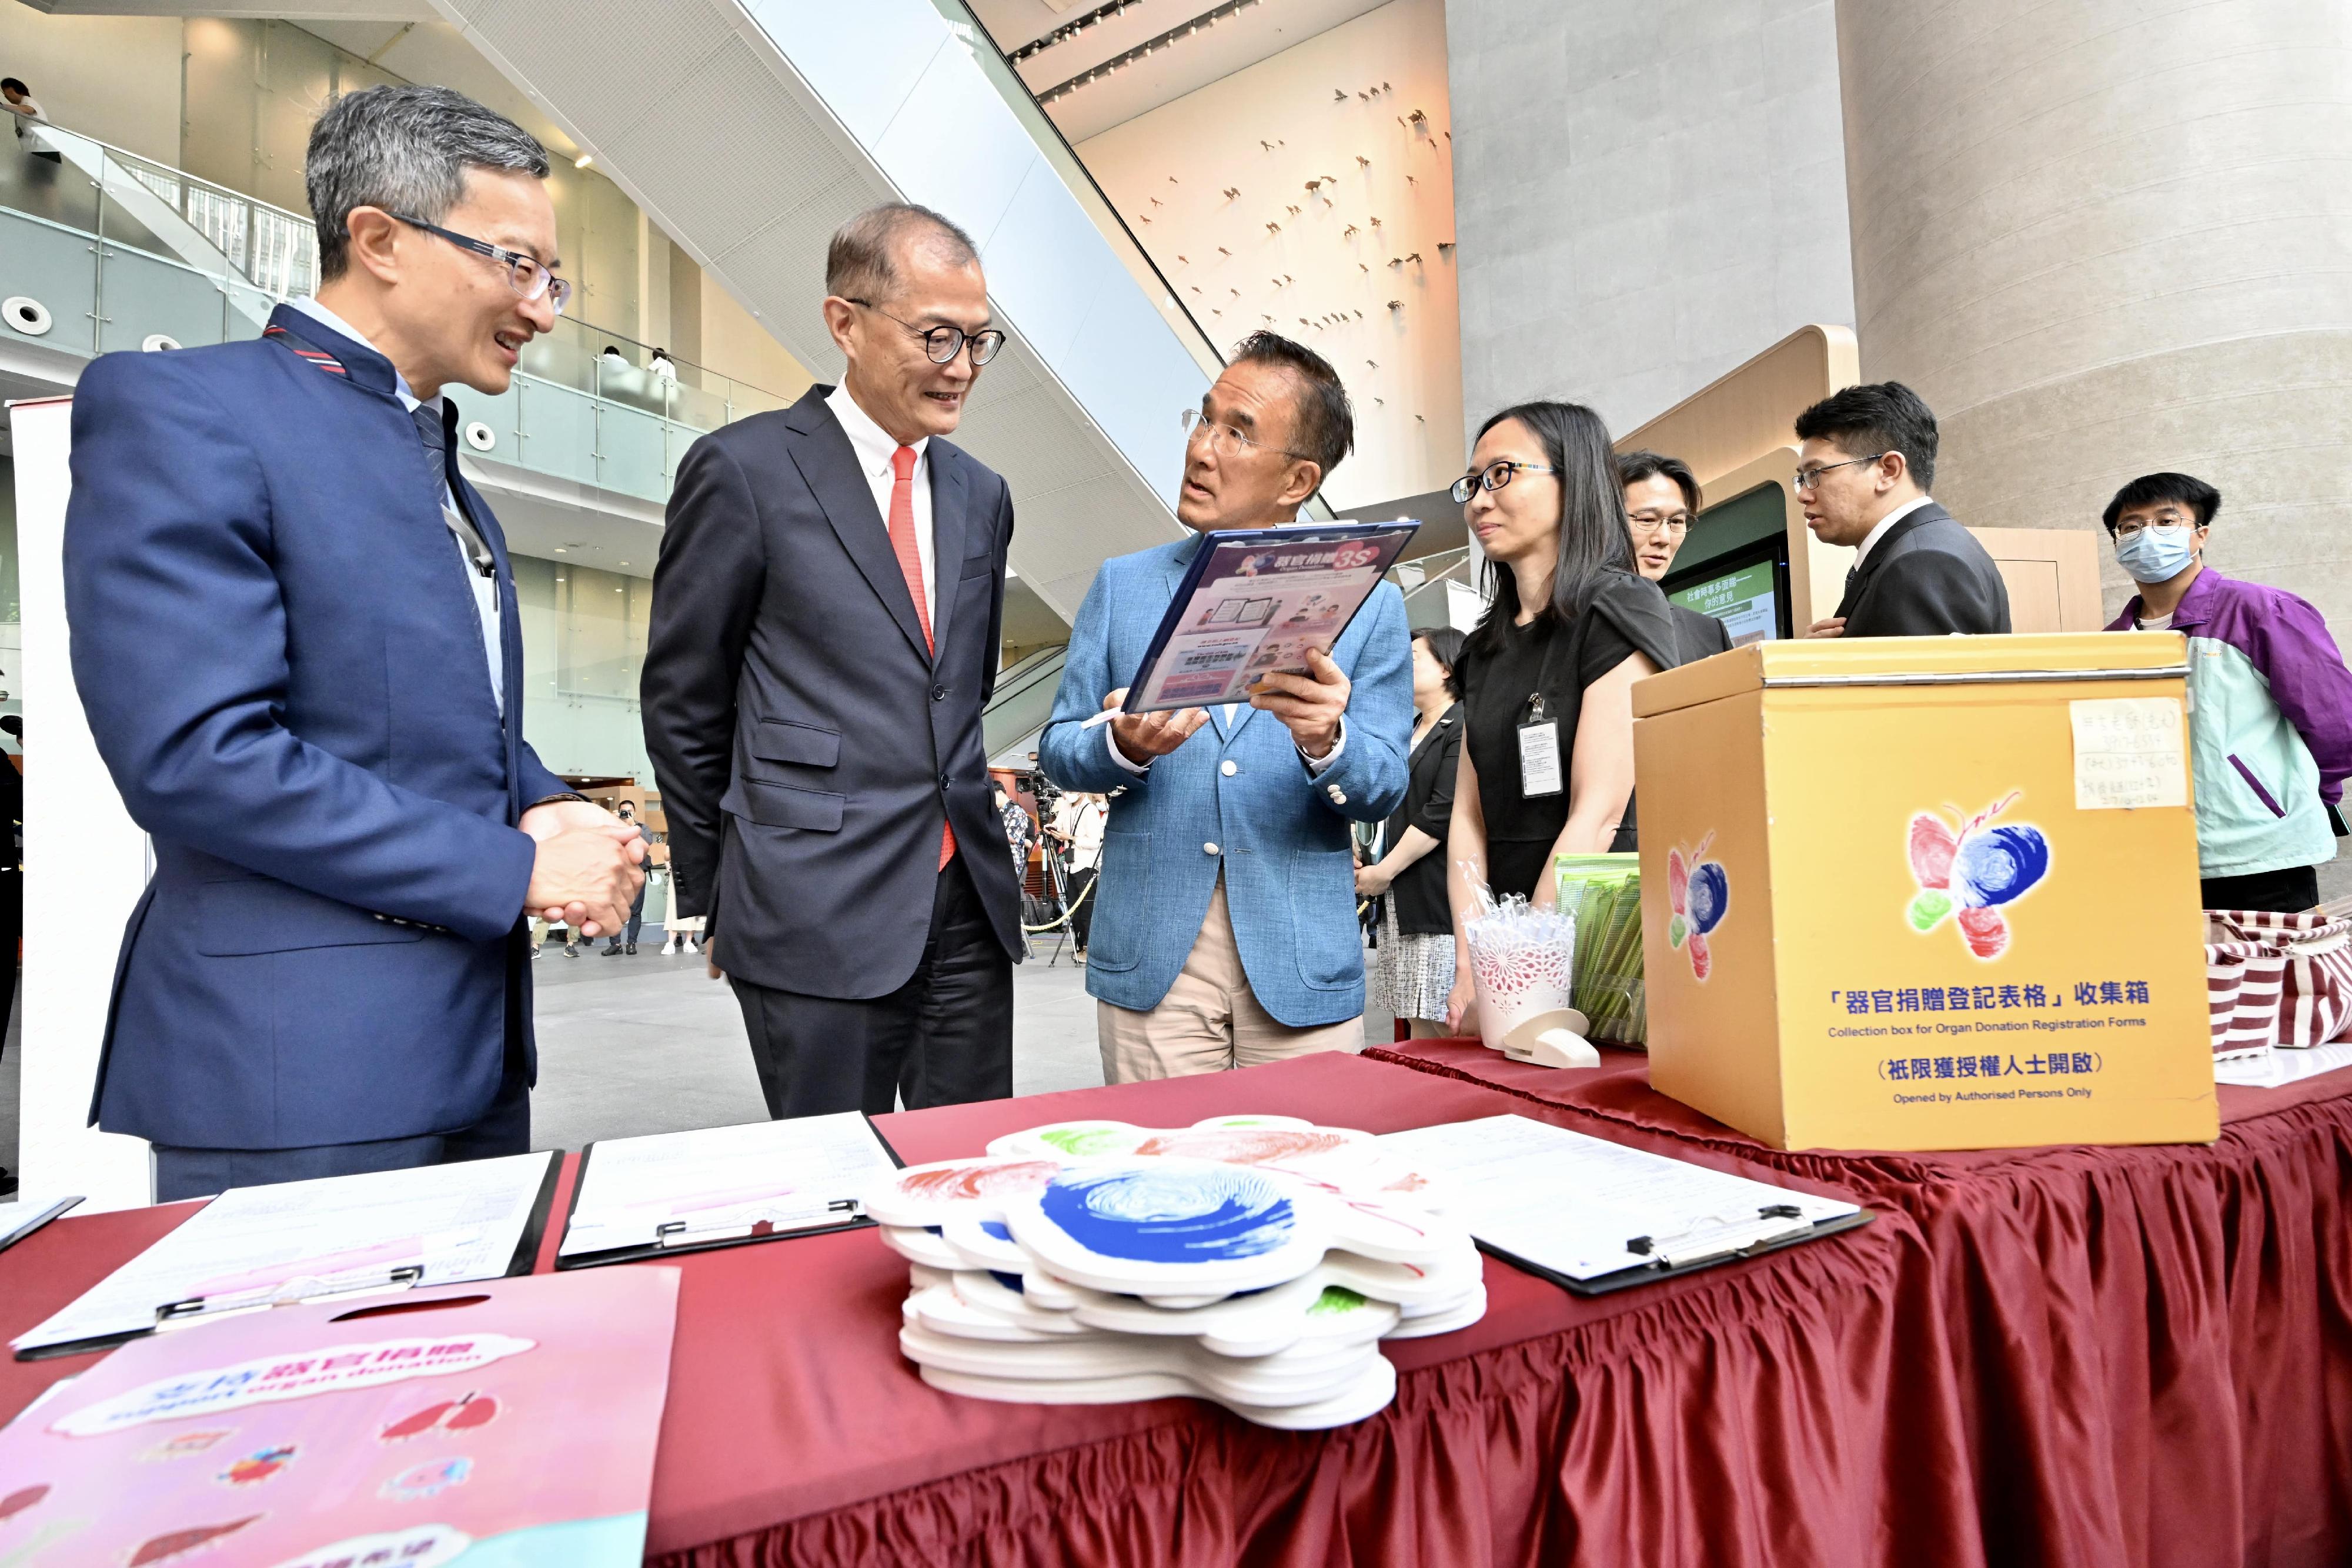 The Secretary for Health, Professor Lo Chung-mau (second left), attends an organ donation promotion event at the Legislative Council (LegCo) Complex today (June 7) and chats with Members of the LegCo.